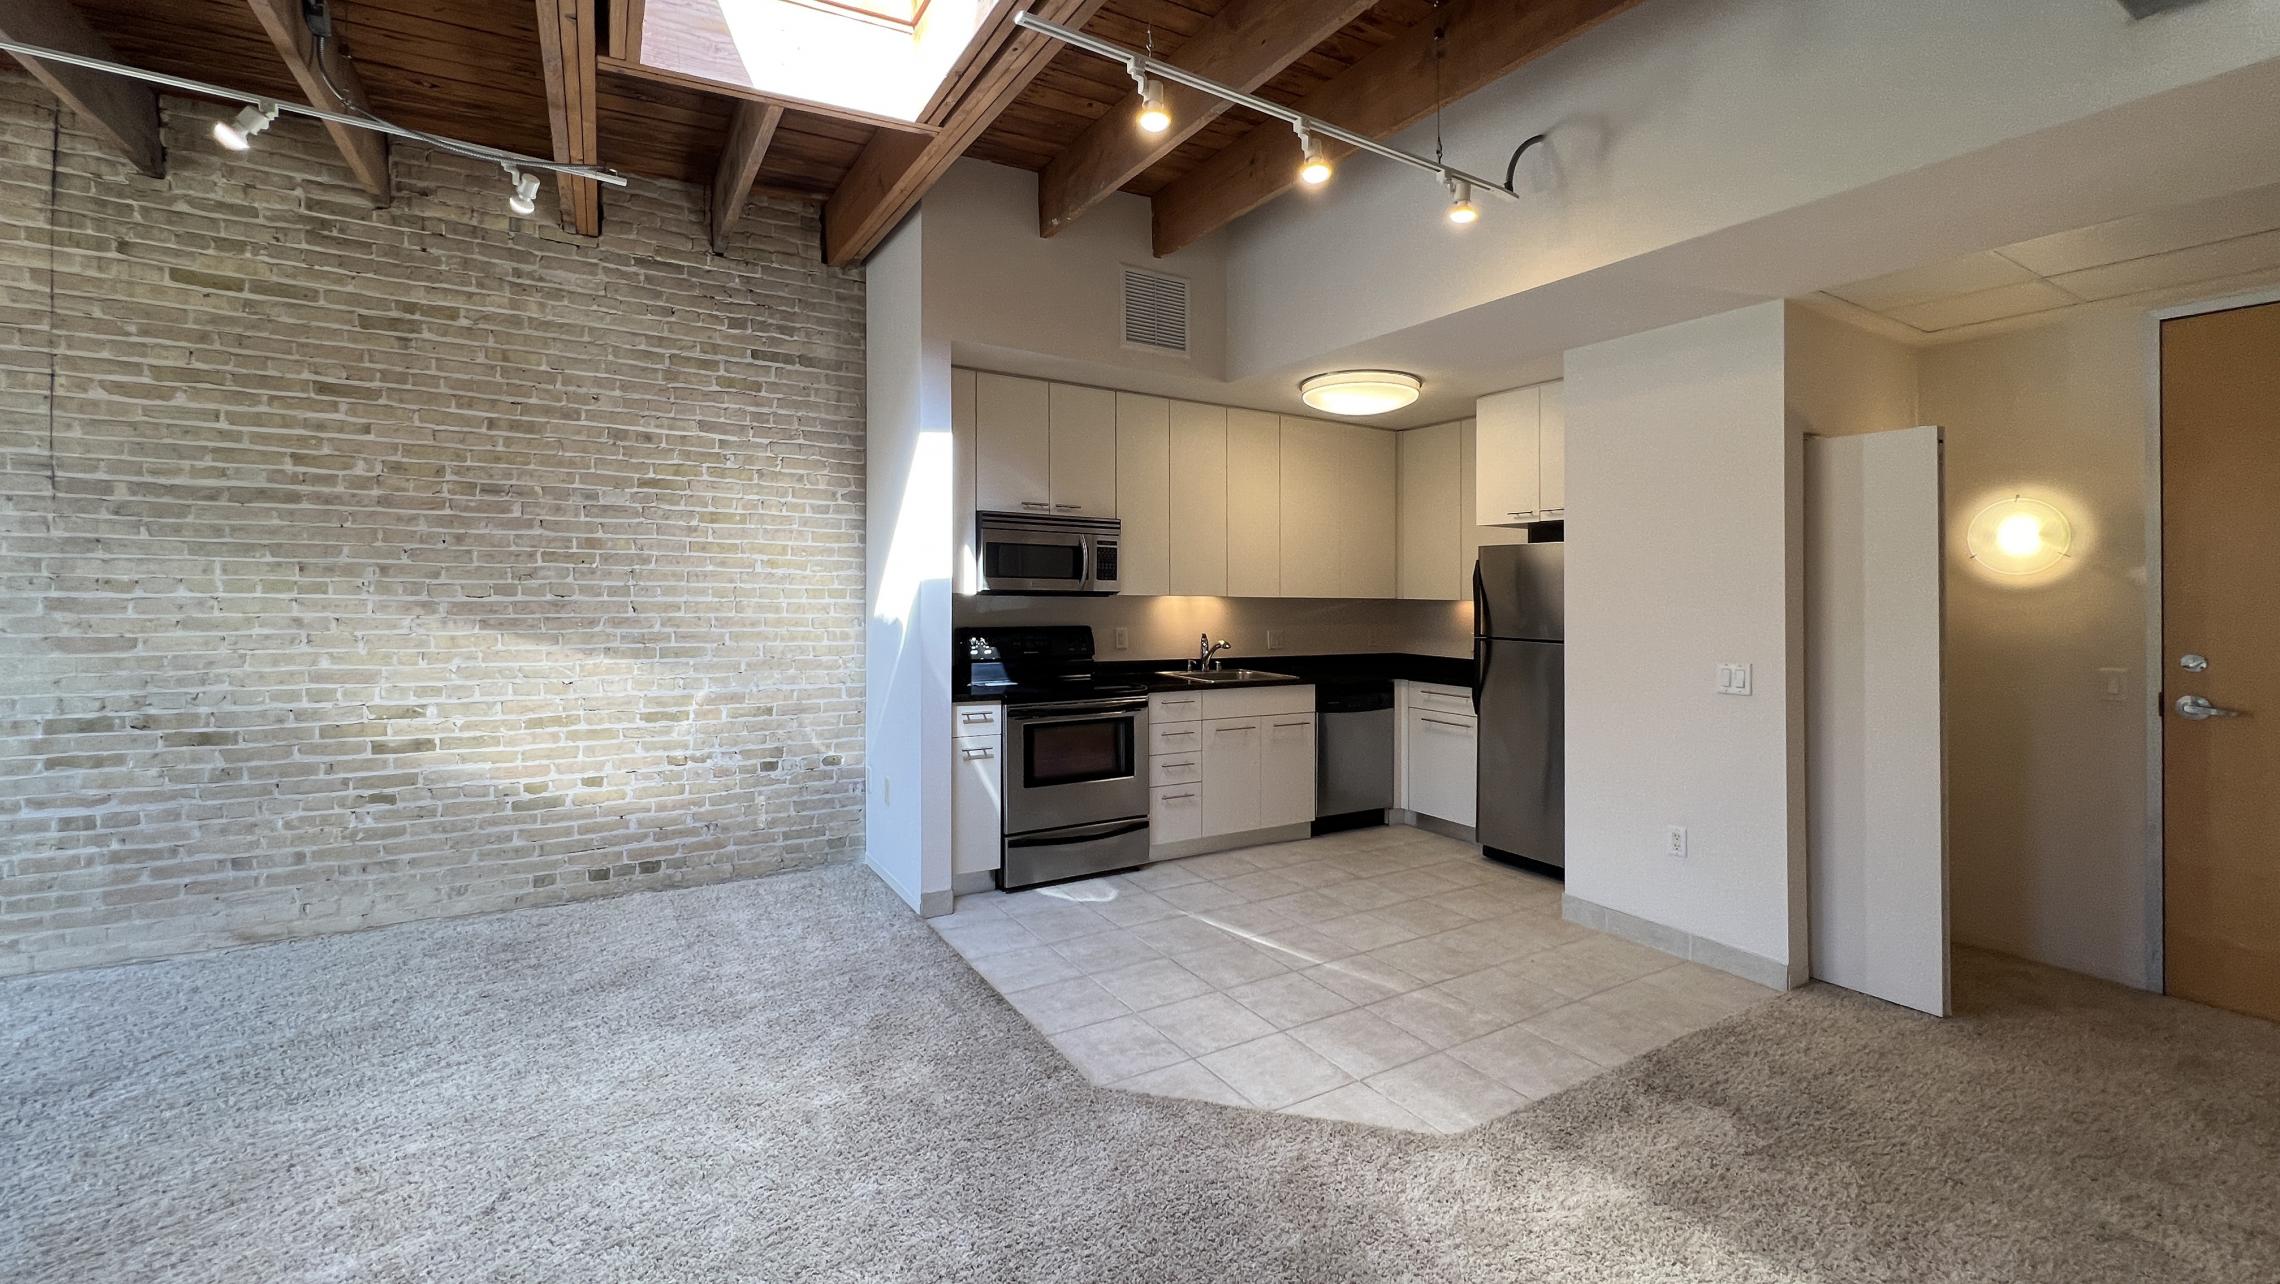 Tobacco-Lofts-at-The-Yards-Apartment-W216-One-Bedroom-Historic-Design-Exposed-Brick-Skylight-Downtown-Madison-Fitness-Lounge-Courtyard-Views-Cats-Upscale 